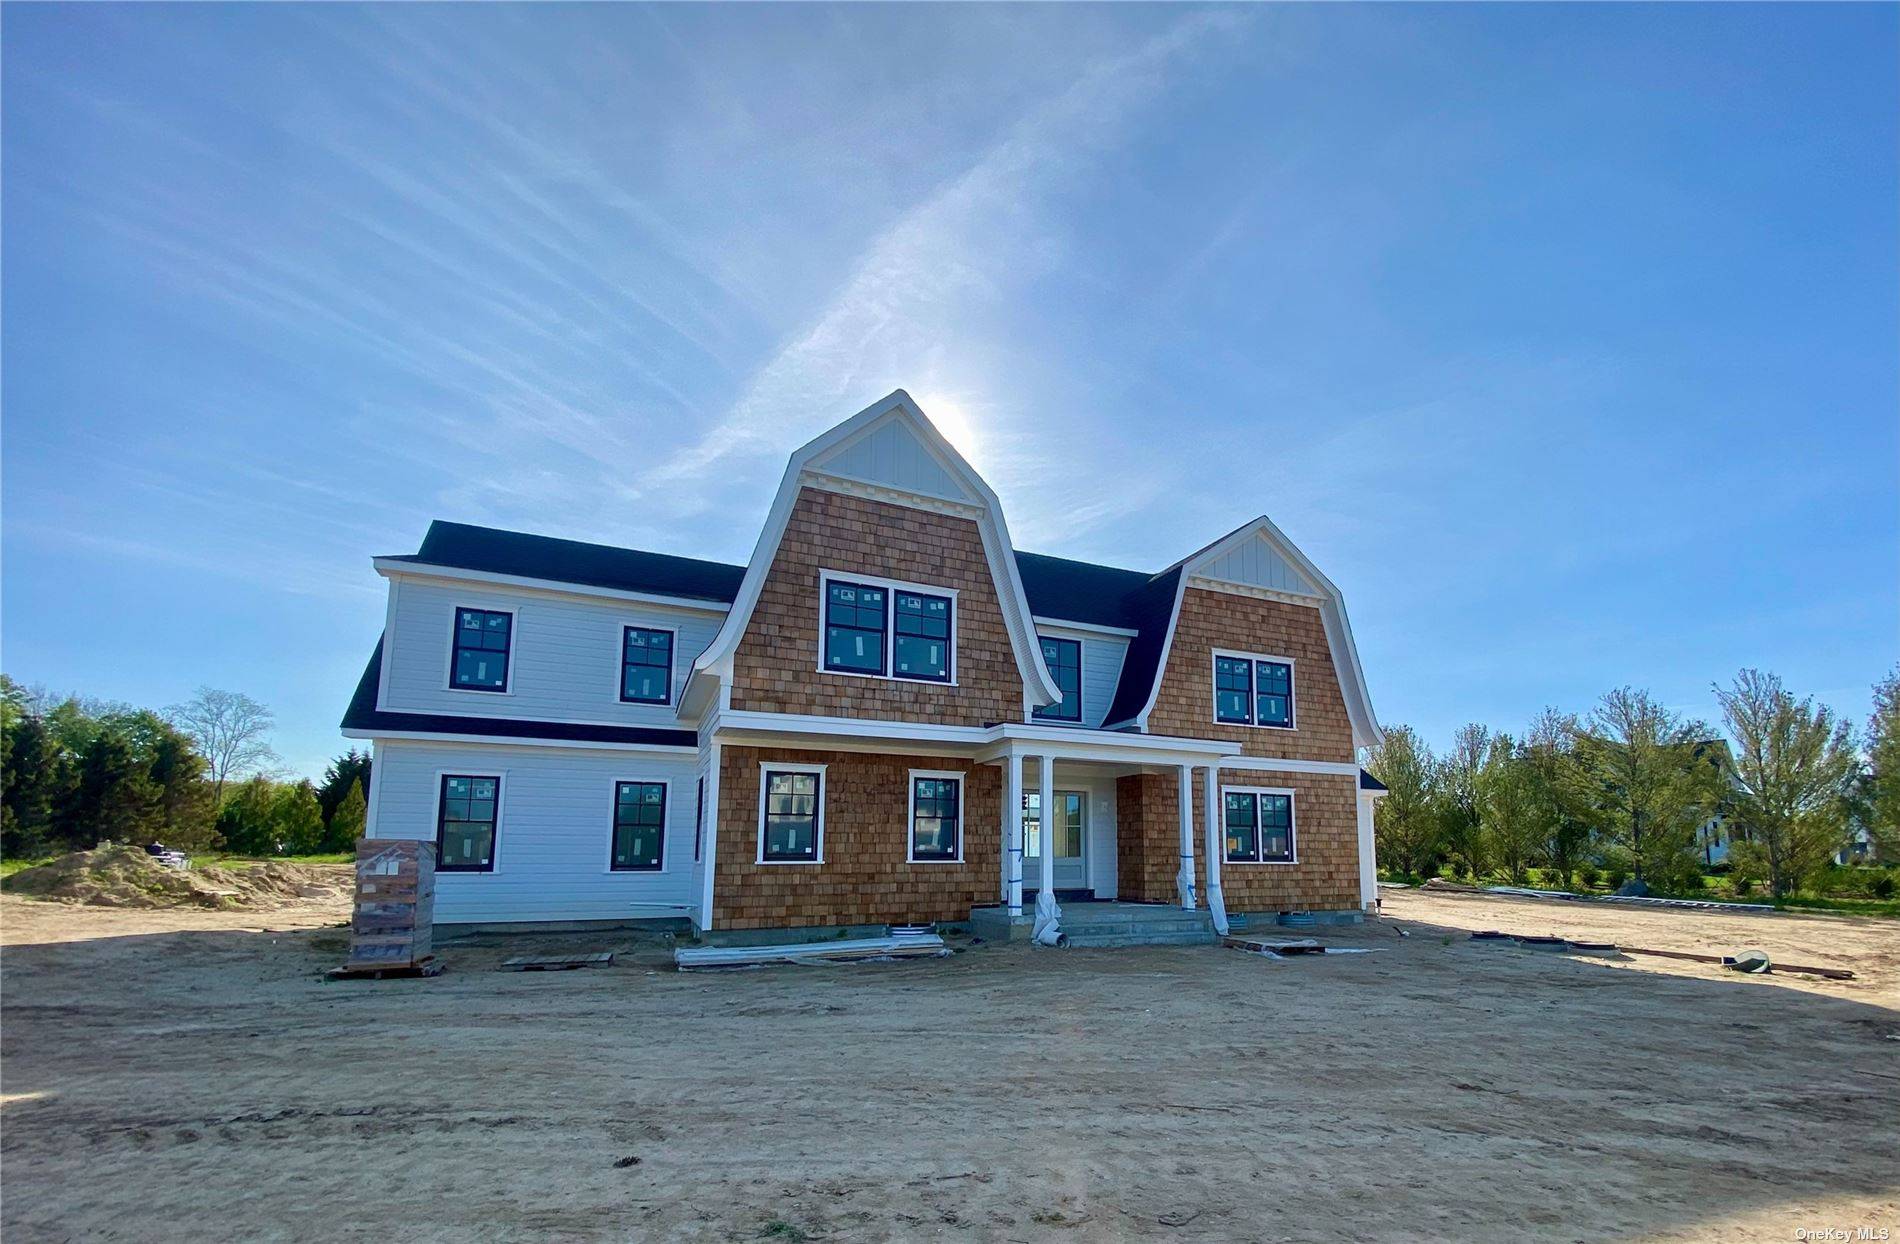 READY TO MOVE IN TODAY ! New Luxury Construction is located in the heart of the North Fork's town of Mattituck.